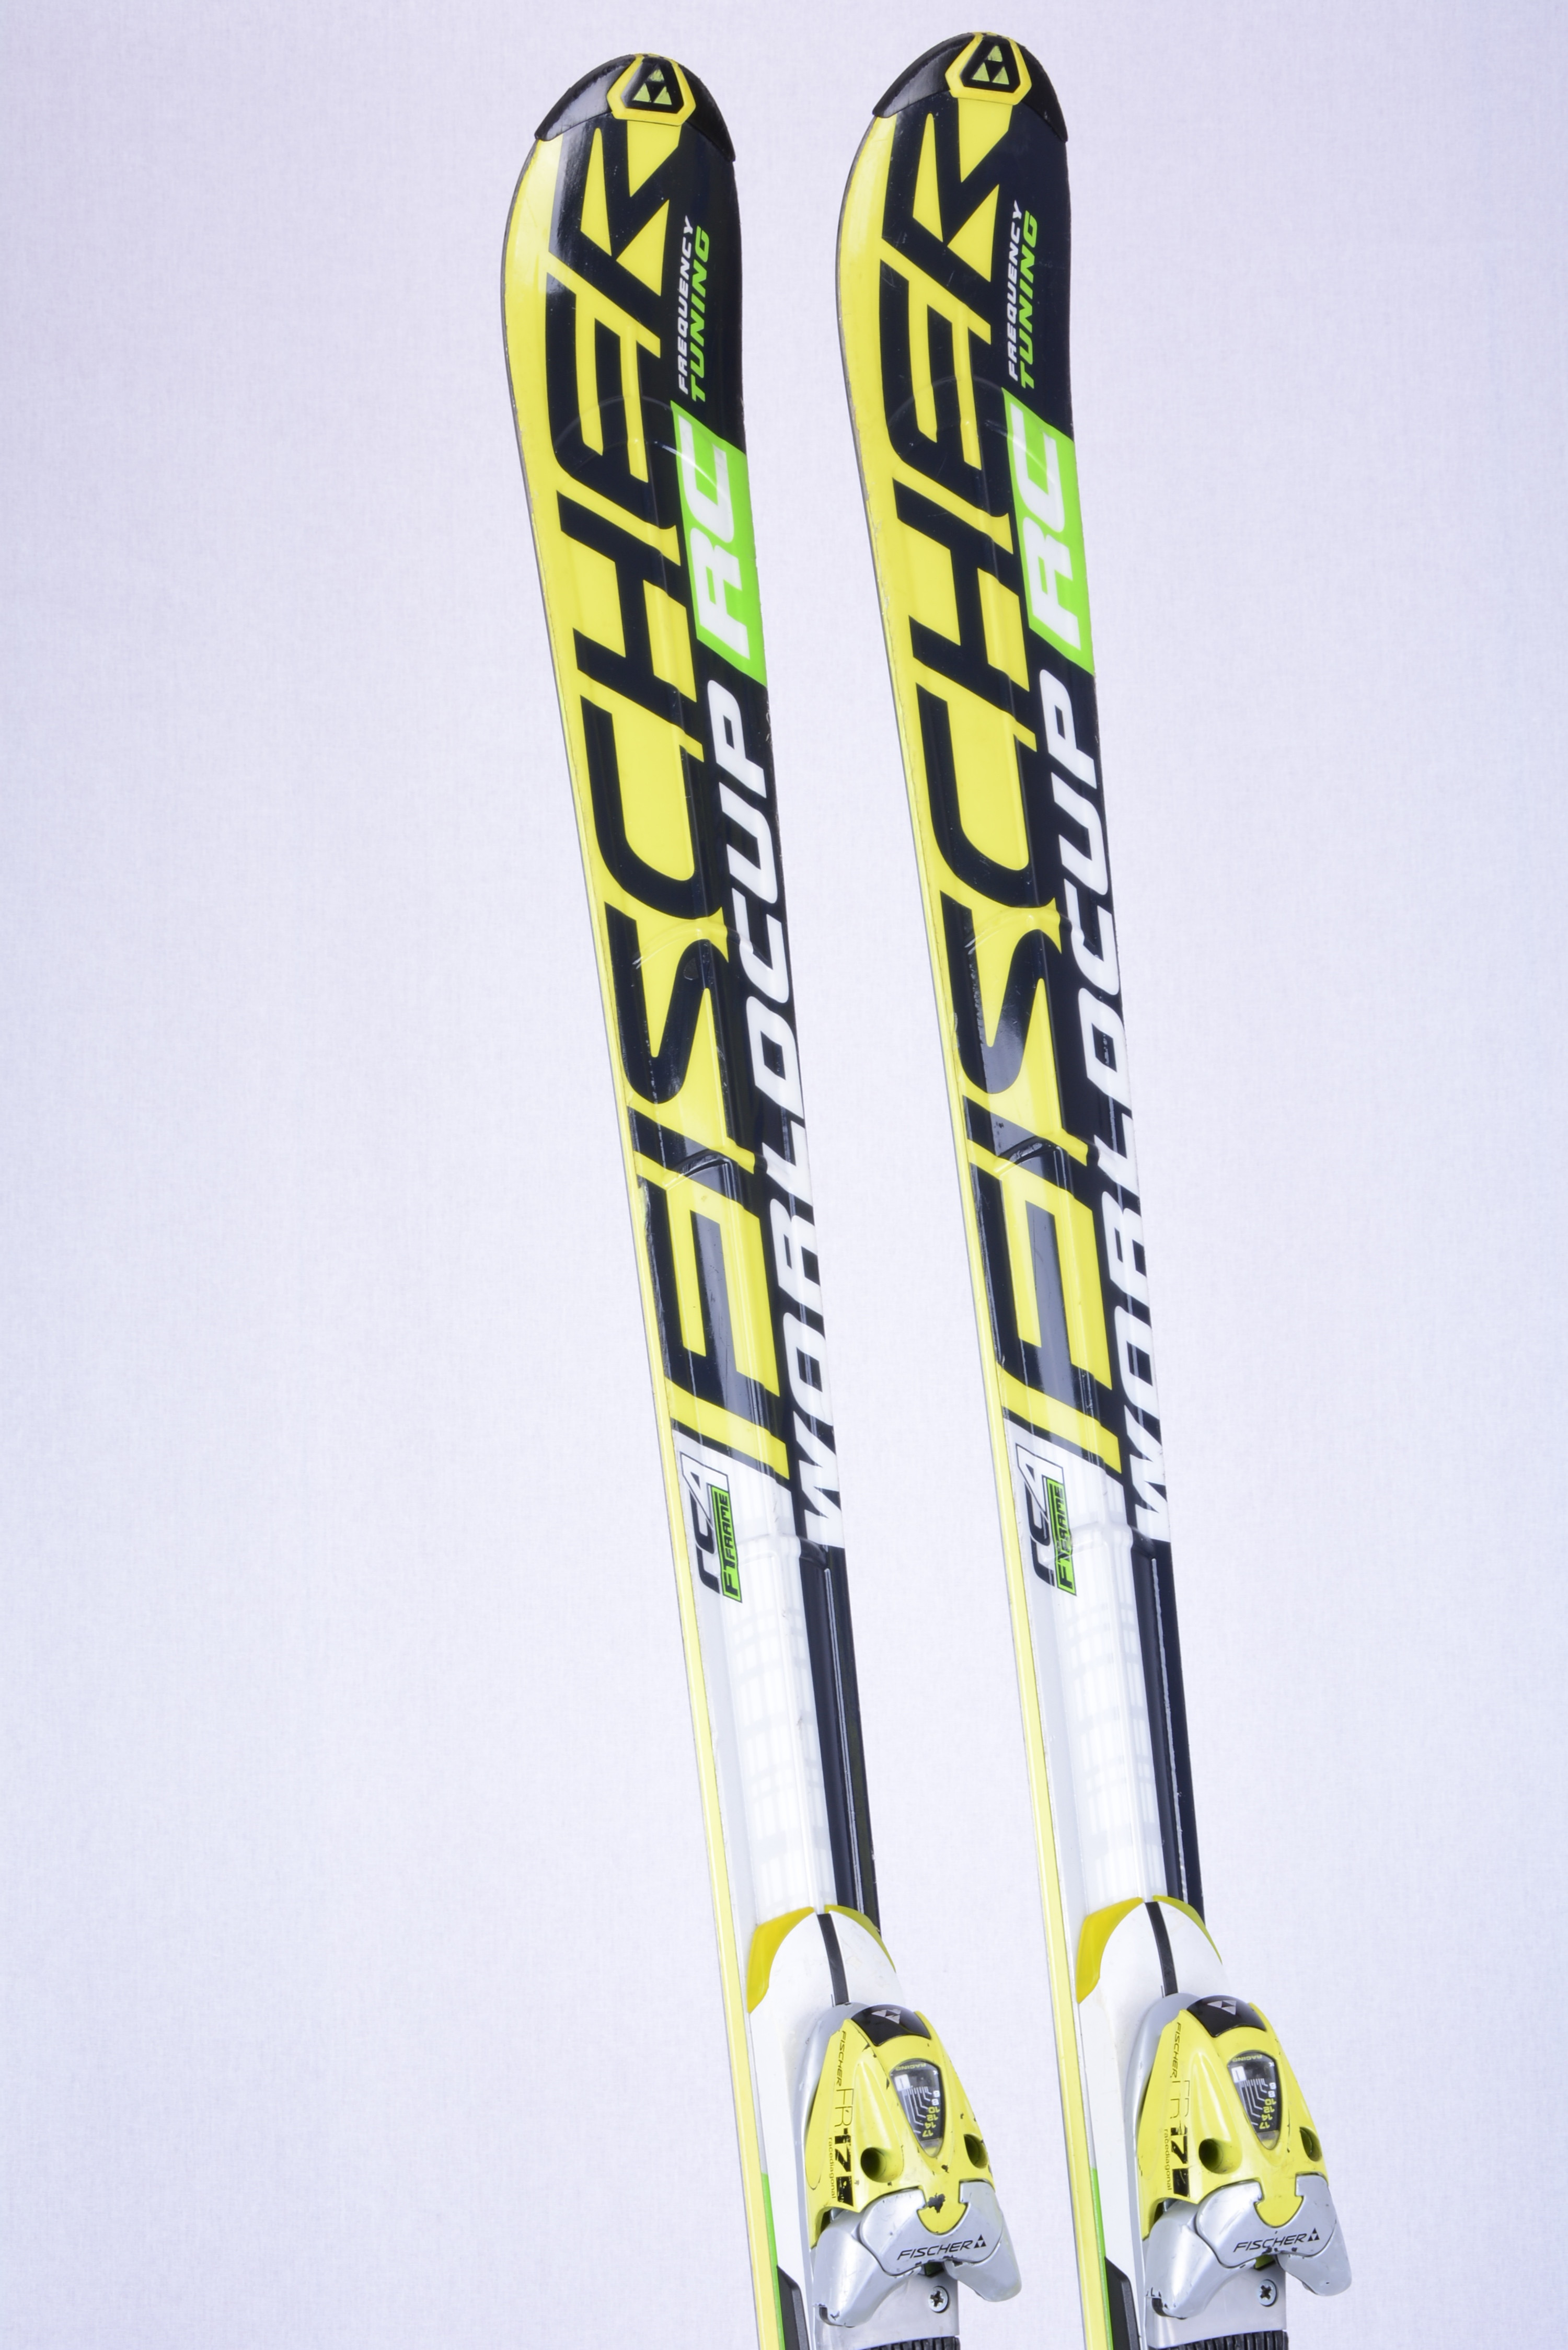 + FREQUENCY FR ft 17 TUNING, RC skis frame, FISCHER titanium WORLDCUP Fischer RC4 aircarbon